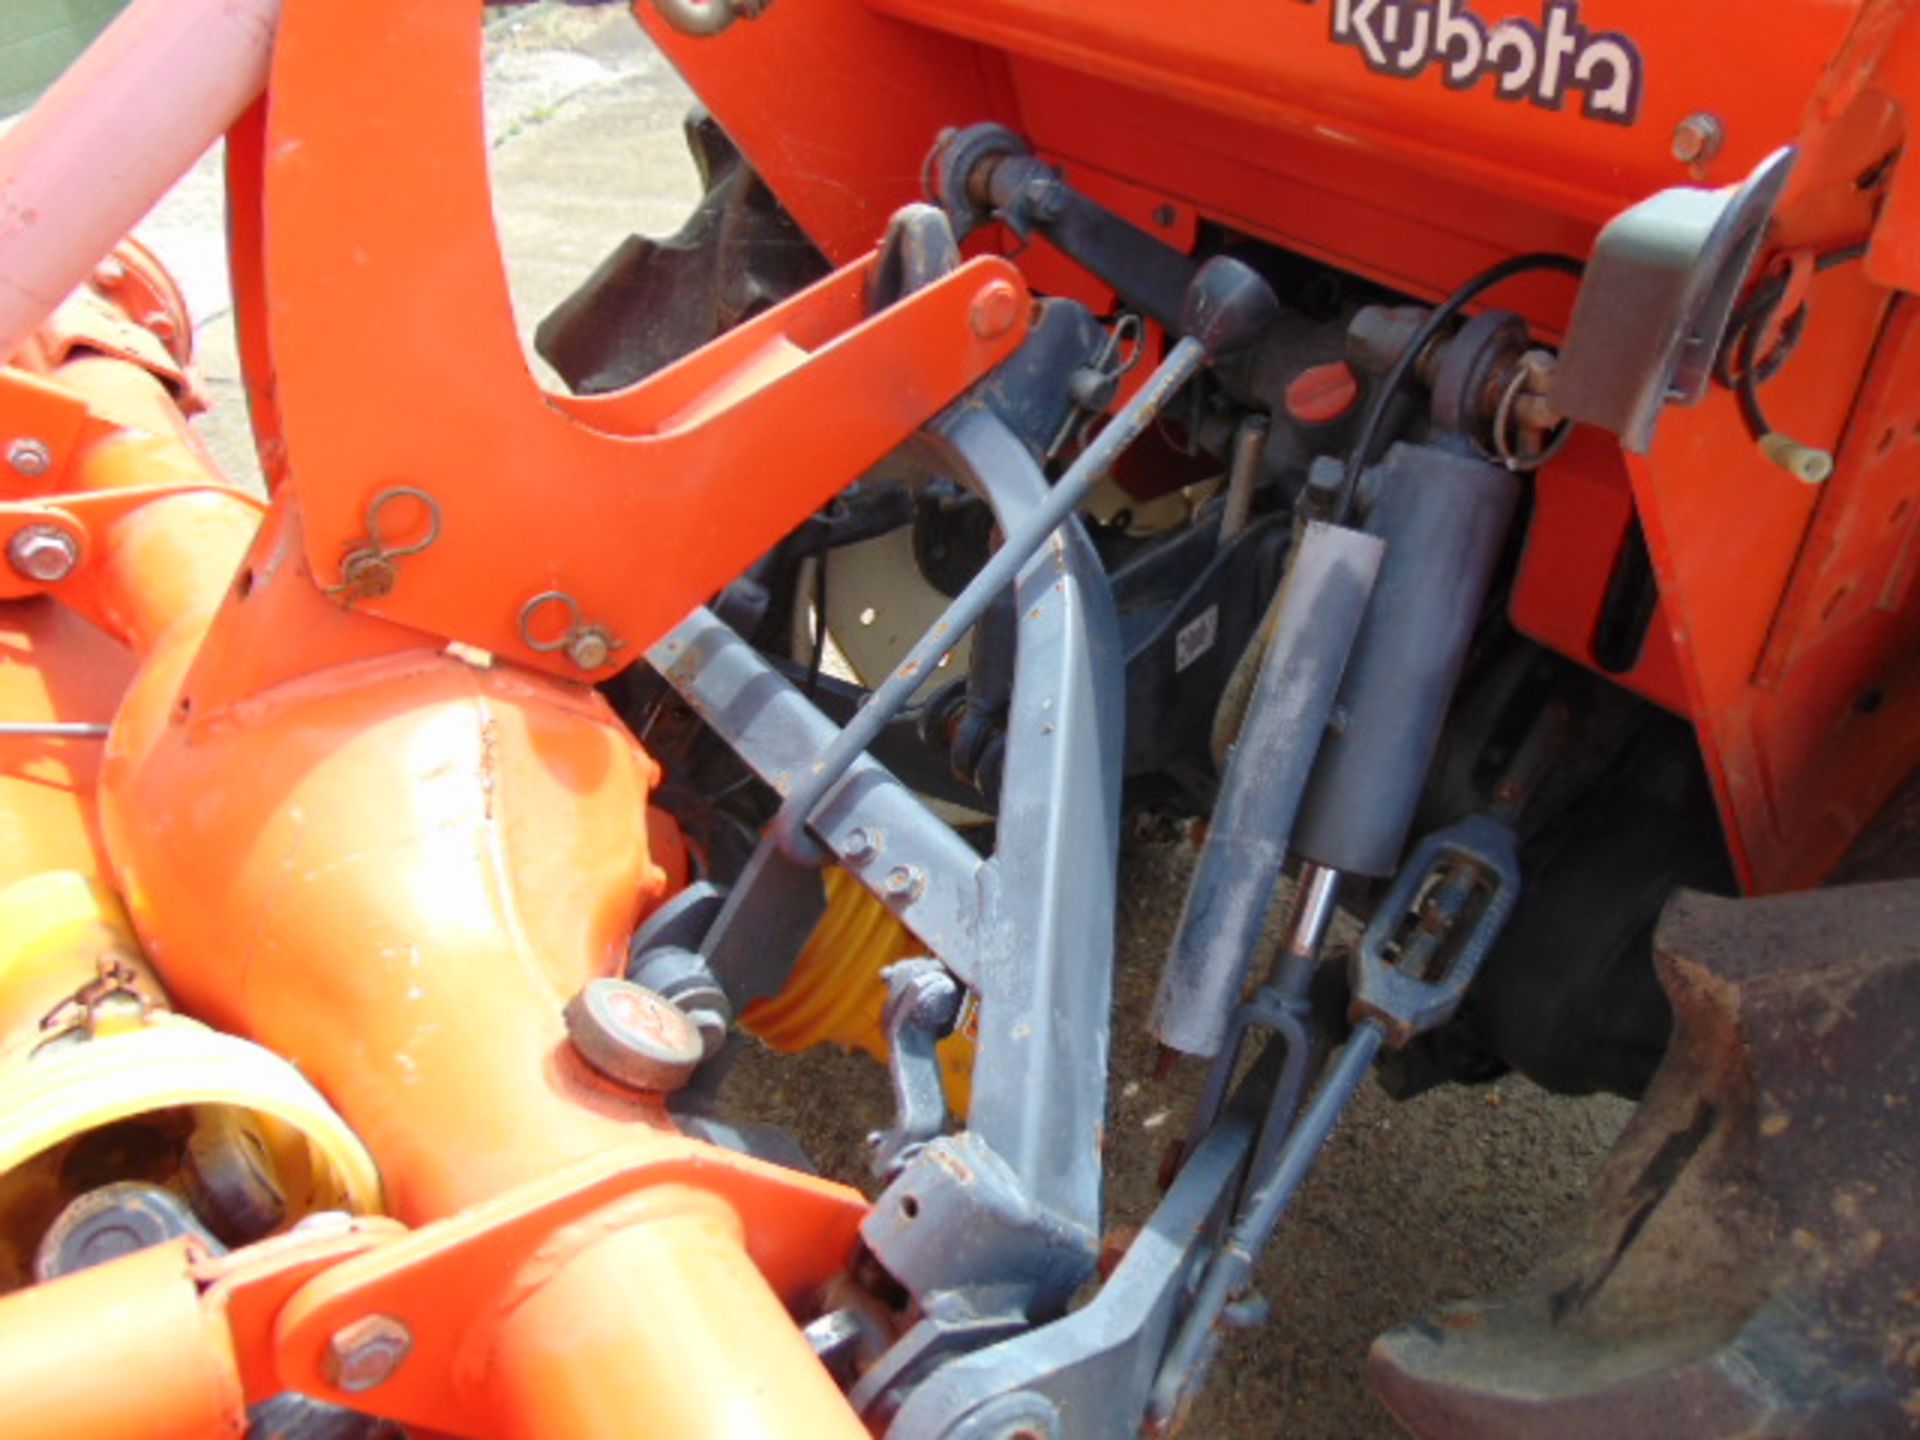 Kubota GL21 Compact Tractor c/w RL14 Rotavator ONLY 670 HOURS! - Image 17 of 29